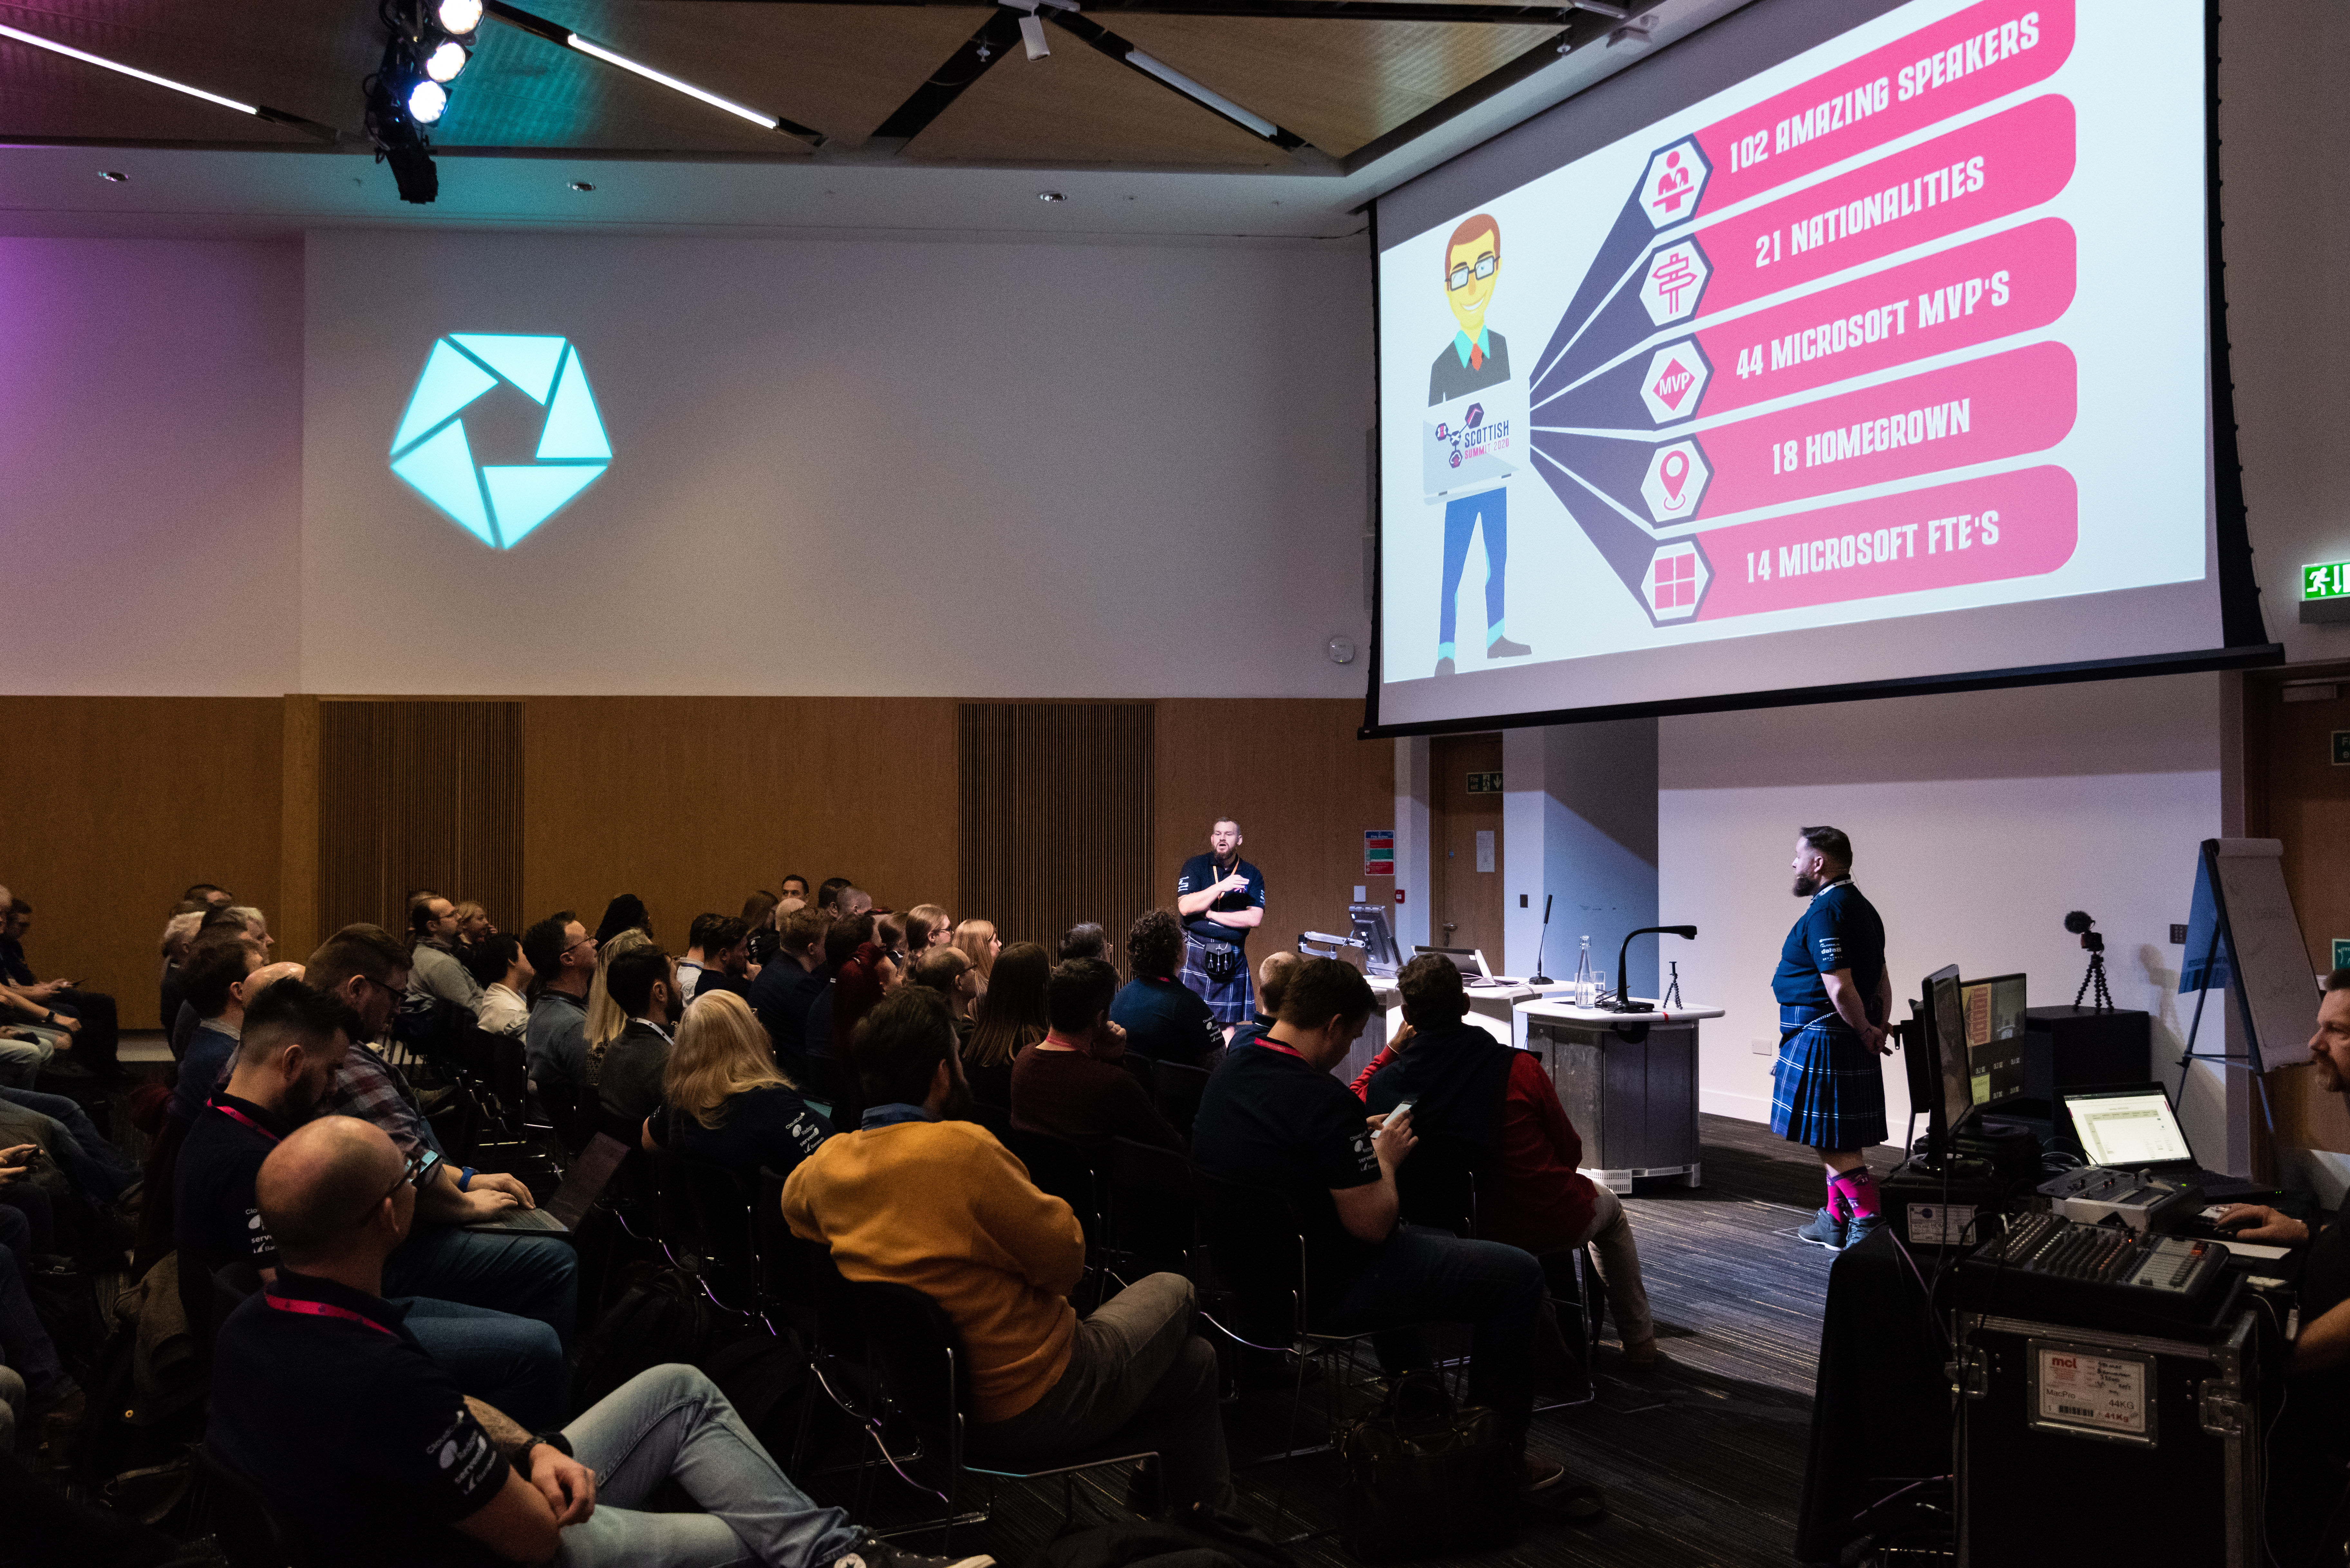 Case study: “Like an icing on the cake of the event” — an app for Scottish Summit, a Microsoft Community event held in Glasgow